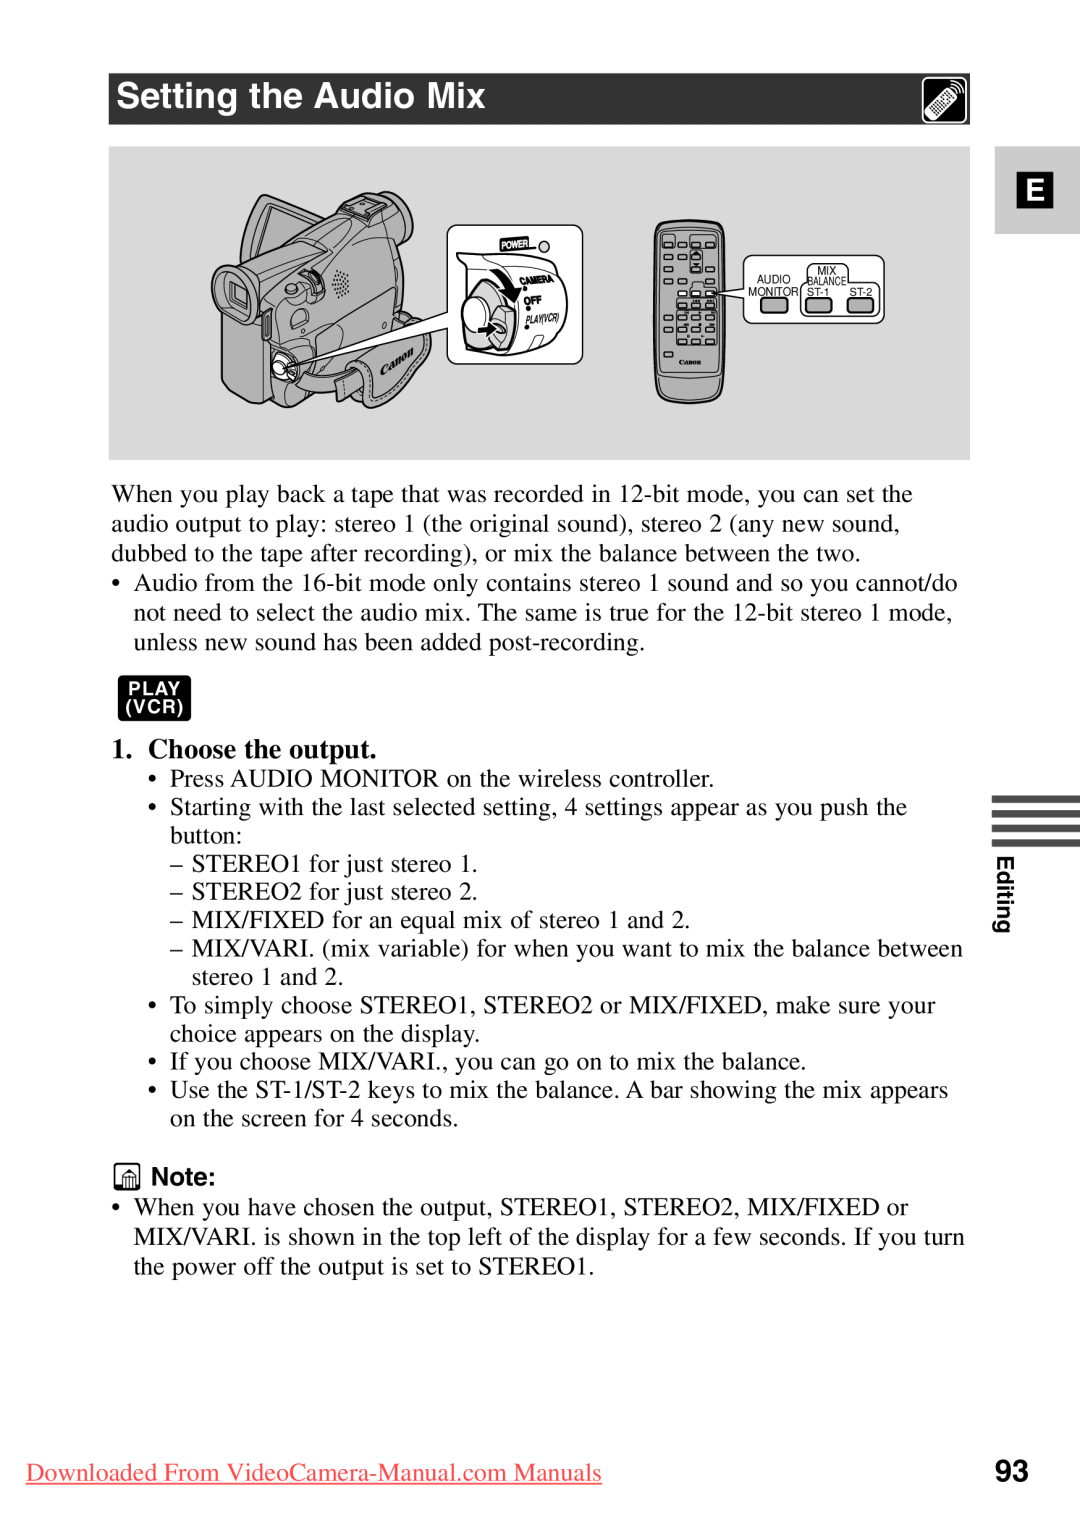 Canon 7561A001, MV500i Setting the Audio Mix, Choose the output, Downloaded From VideoCamera-Manual.com Manuals 